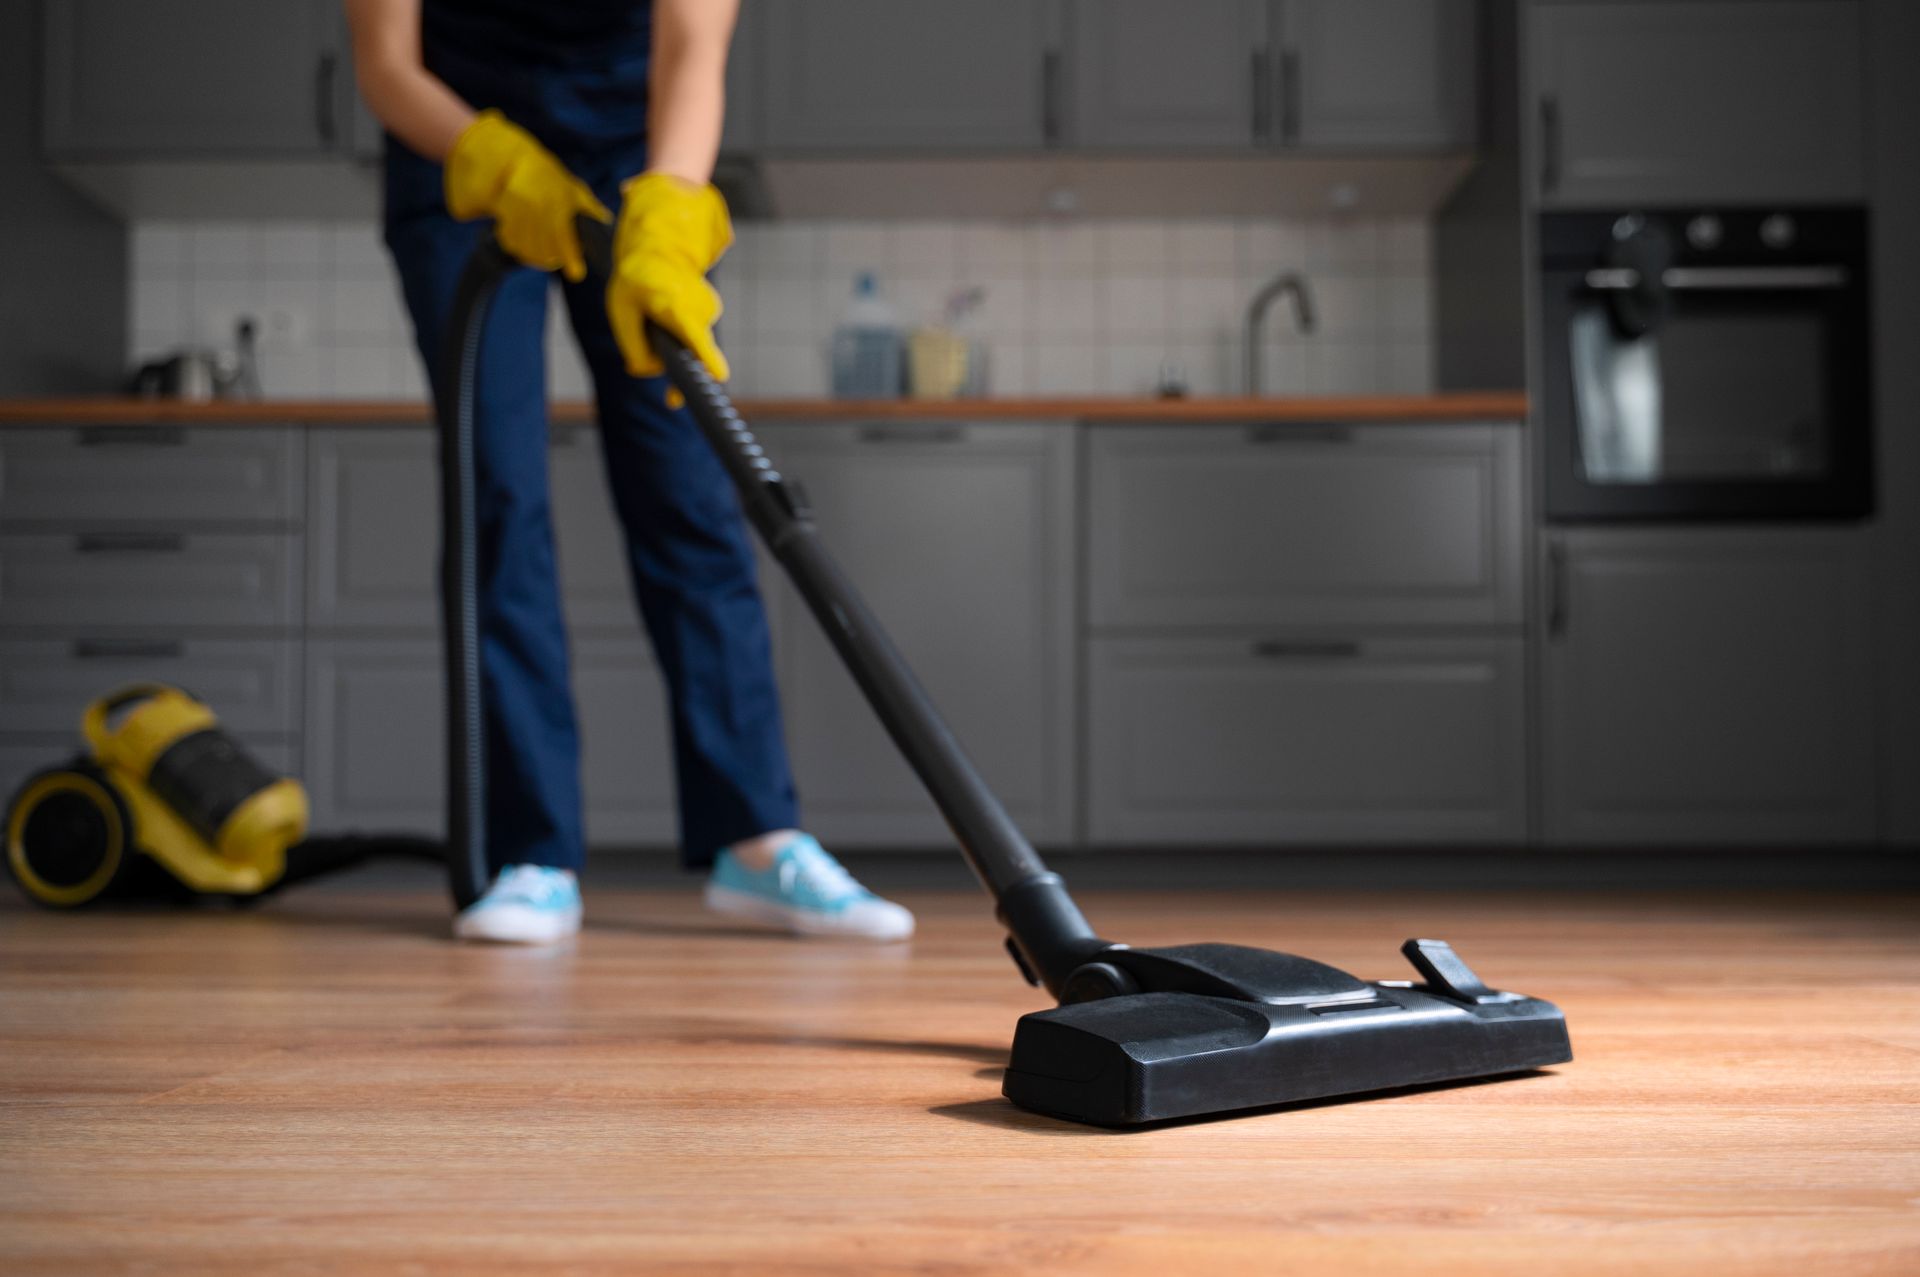 A woman is using a vacuum cleaner to clean the floor in a kitchen.